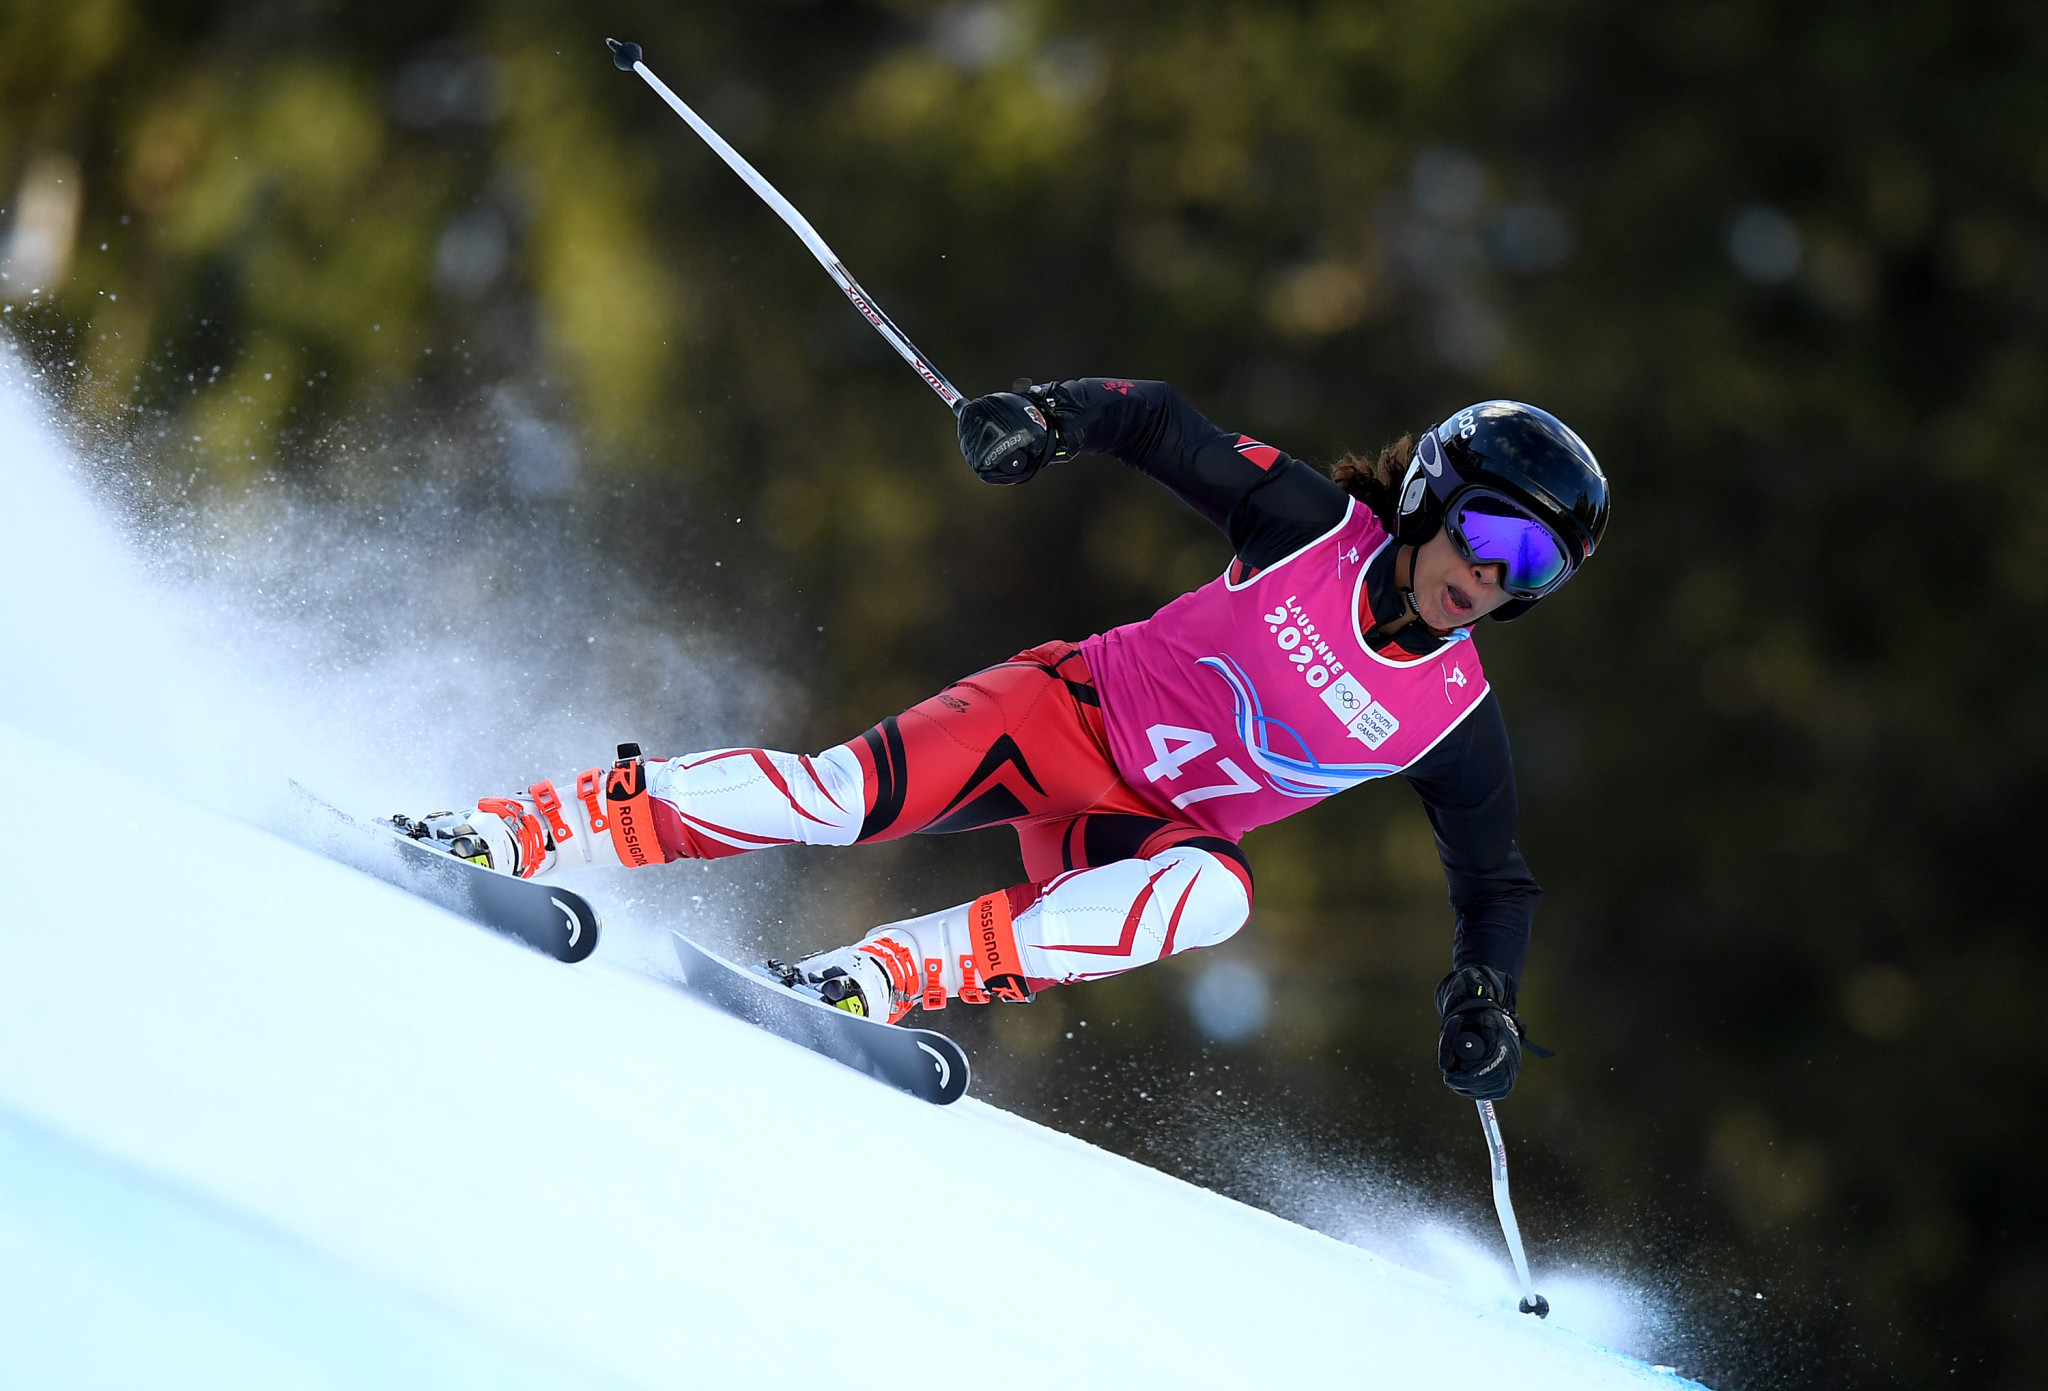 Abigail Viera became the first Winter Youth Olympic Games participant from Trinidad and Tobago ©Getty Images